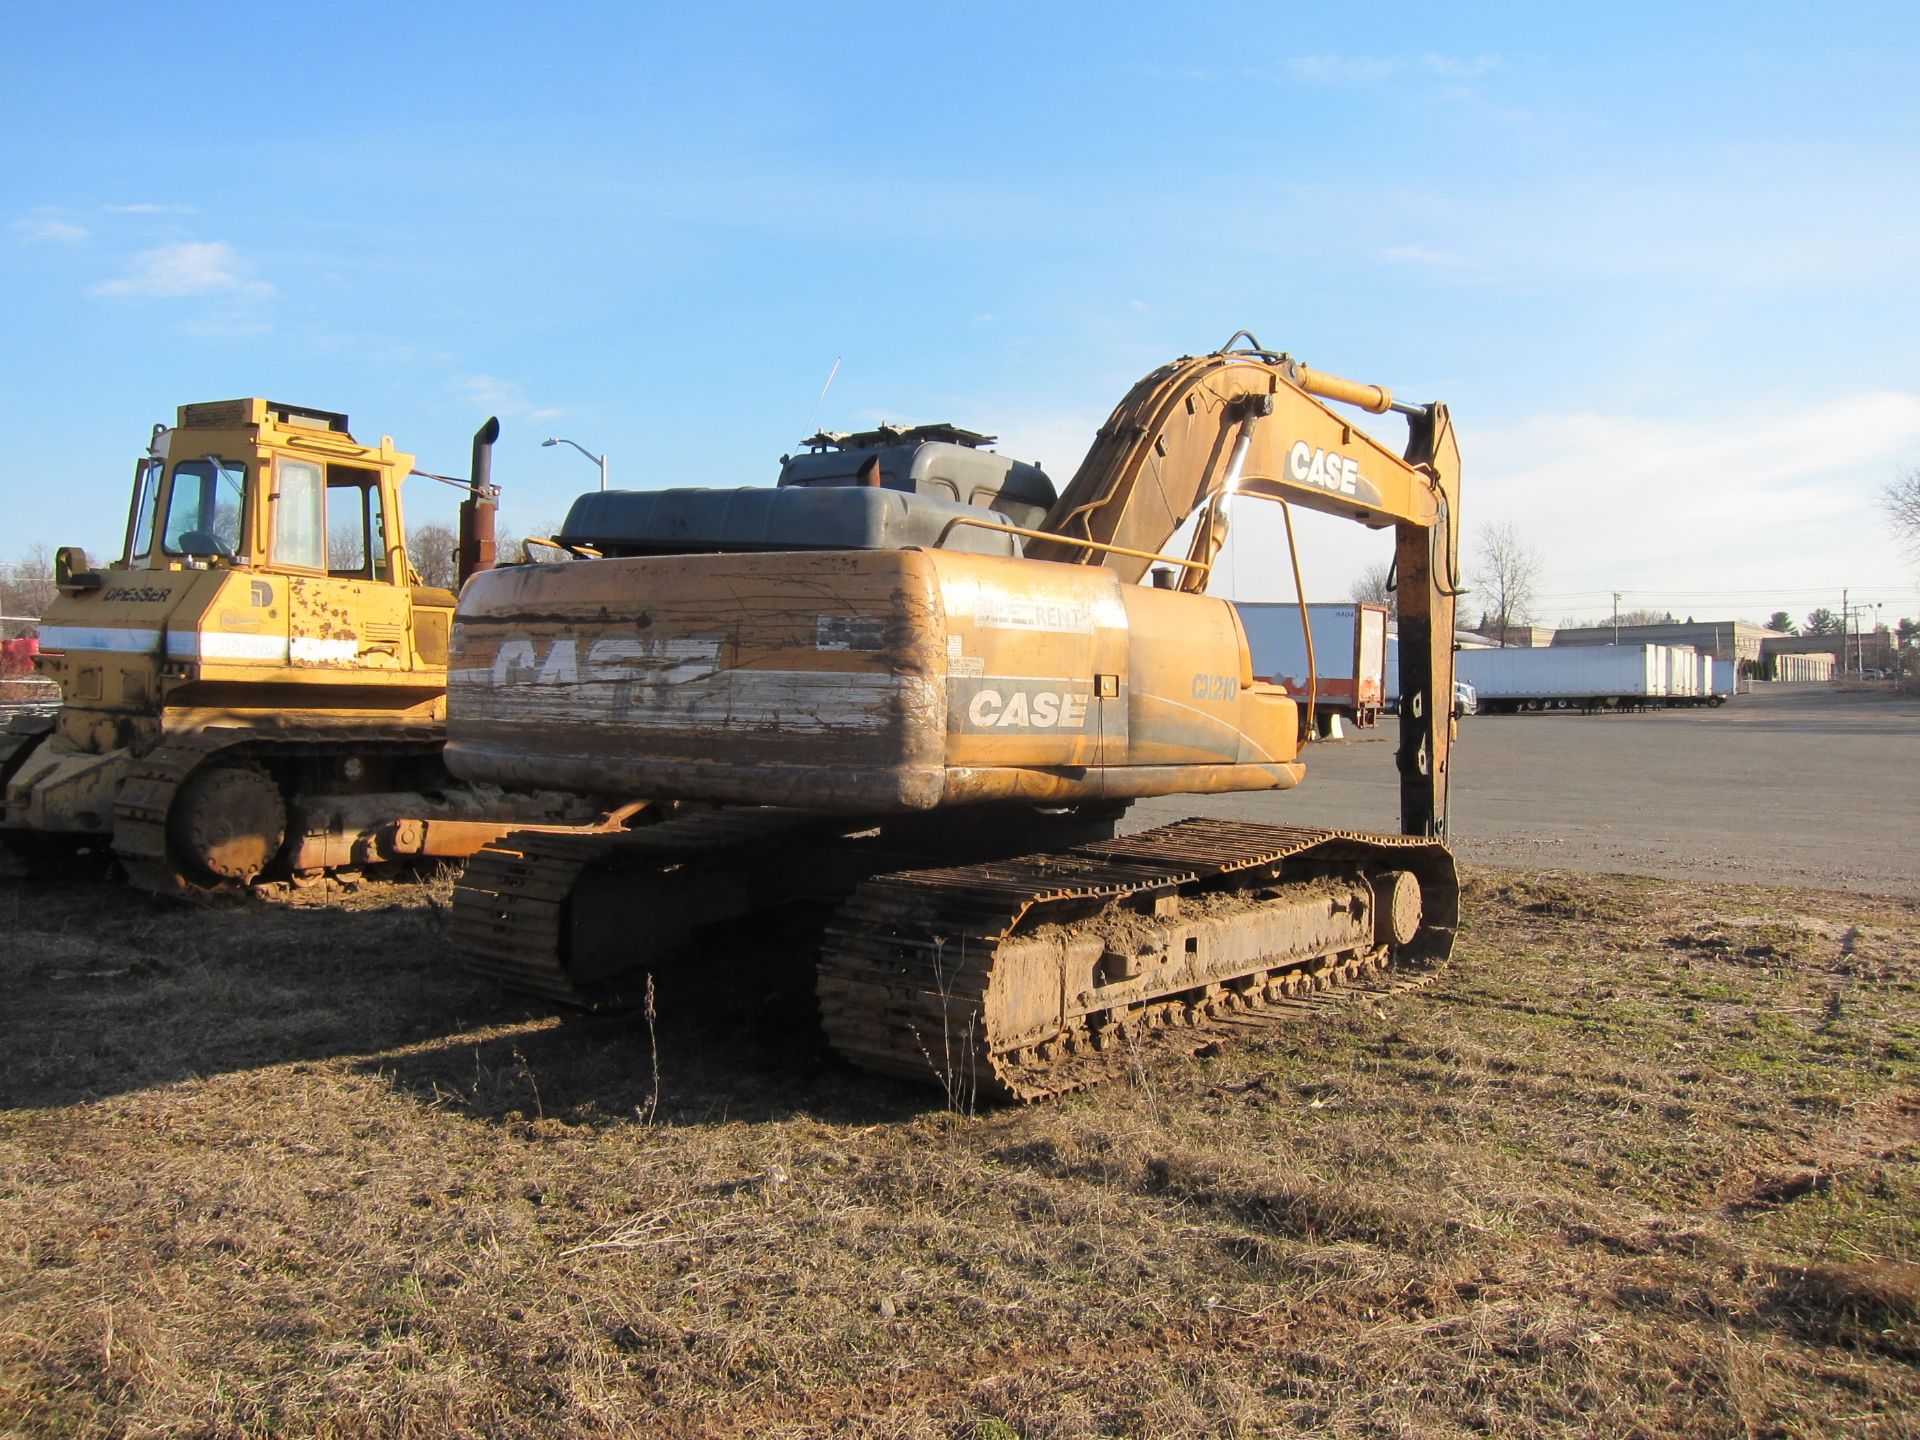 2004 Case Crawler Excavator mdl CX-210 EROPS with AC cab, third valve plumbed to stick for grapple - Image 3 of 4